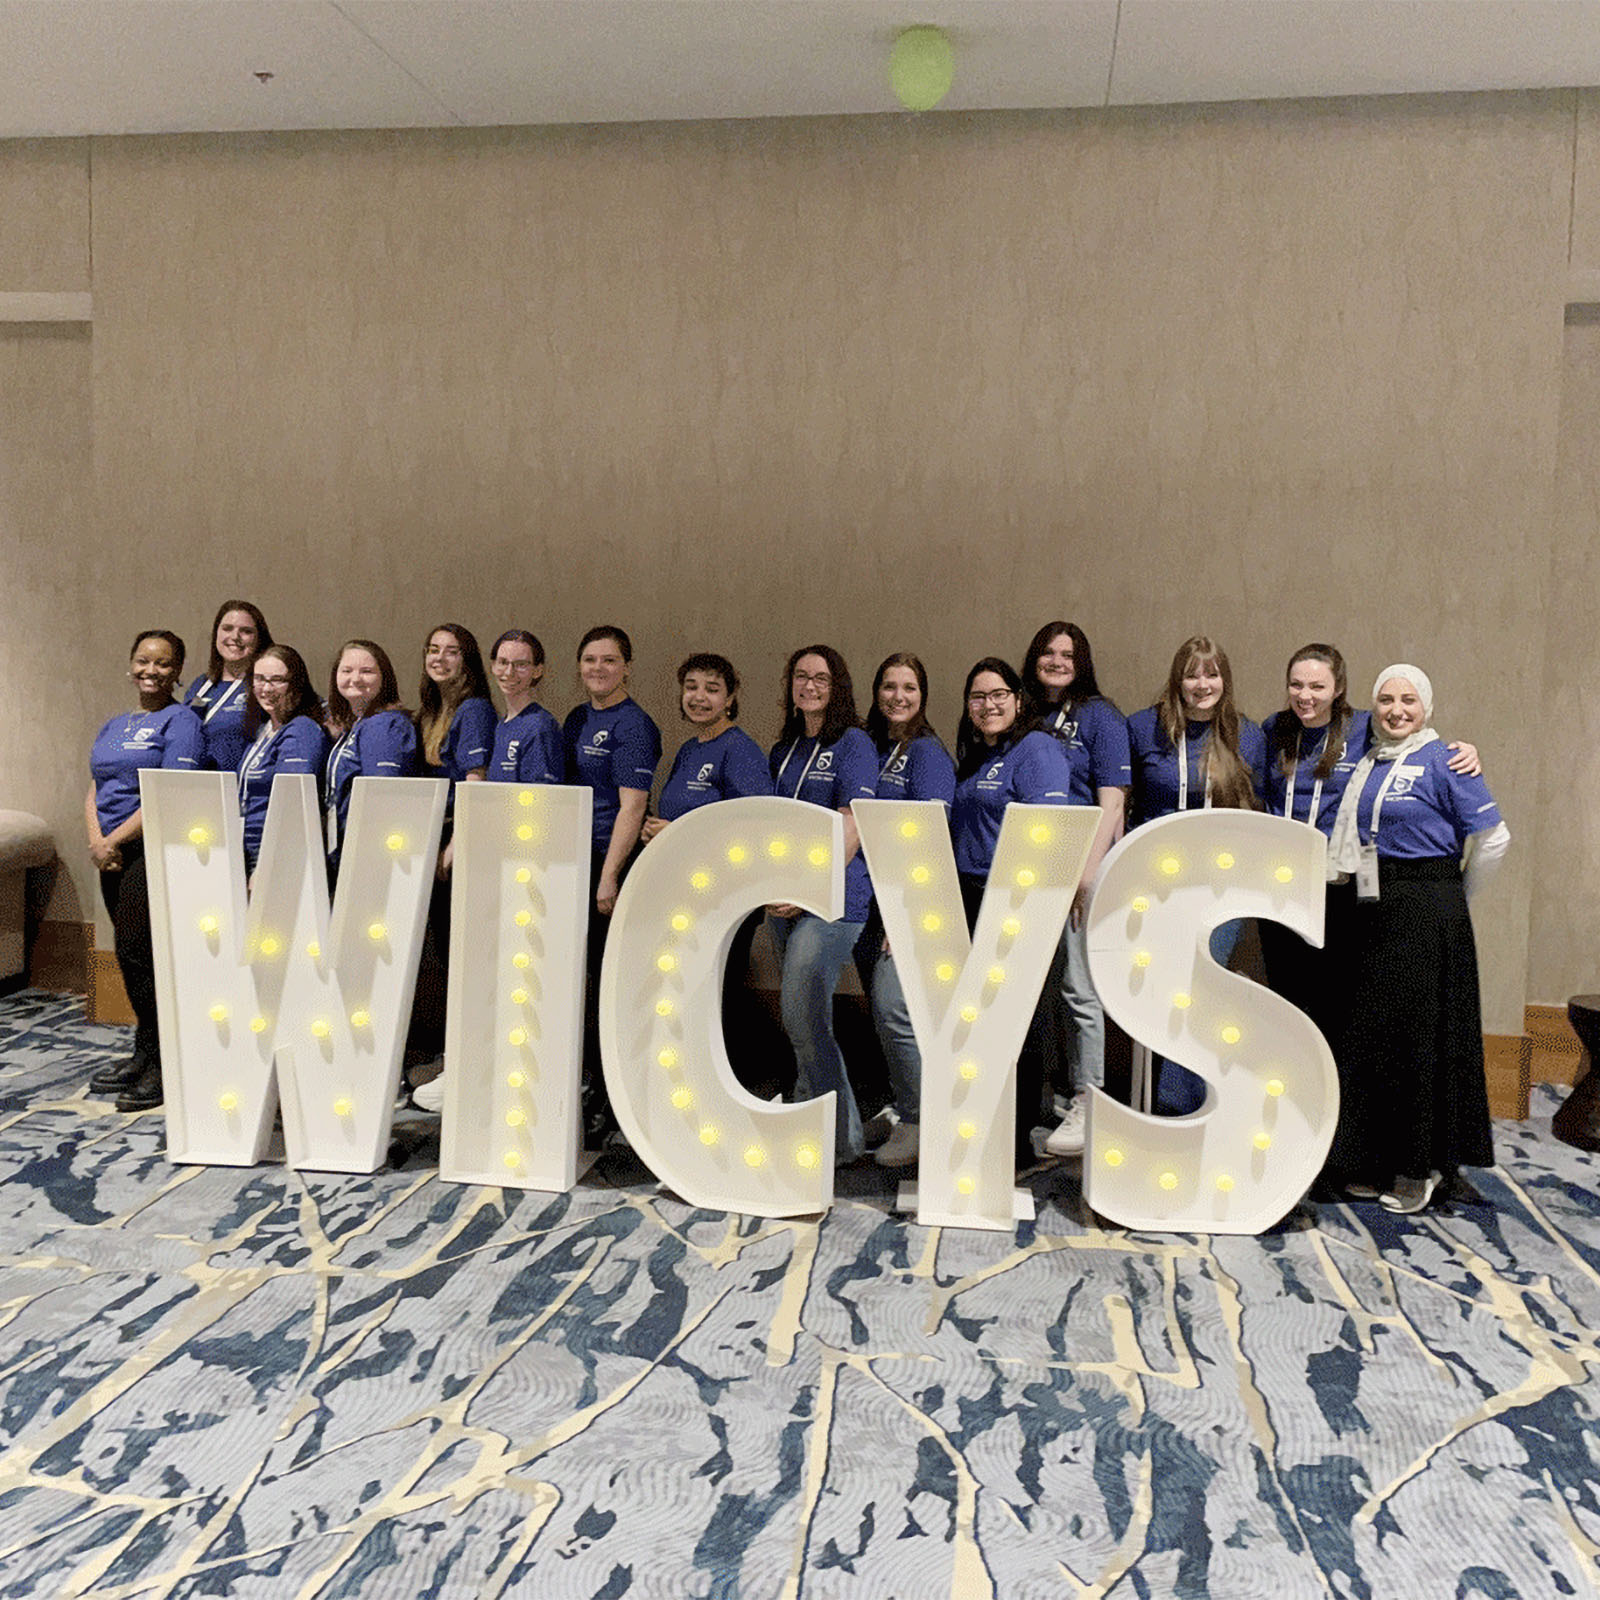 a large group of female cybersecurity students posing behind a "women in cybersecurity" sign at an event